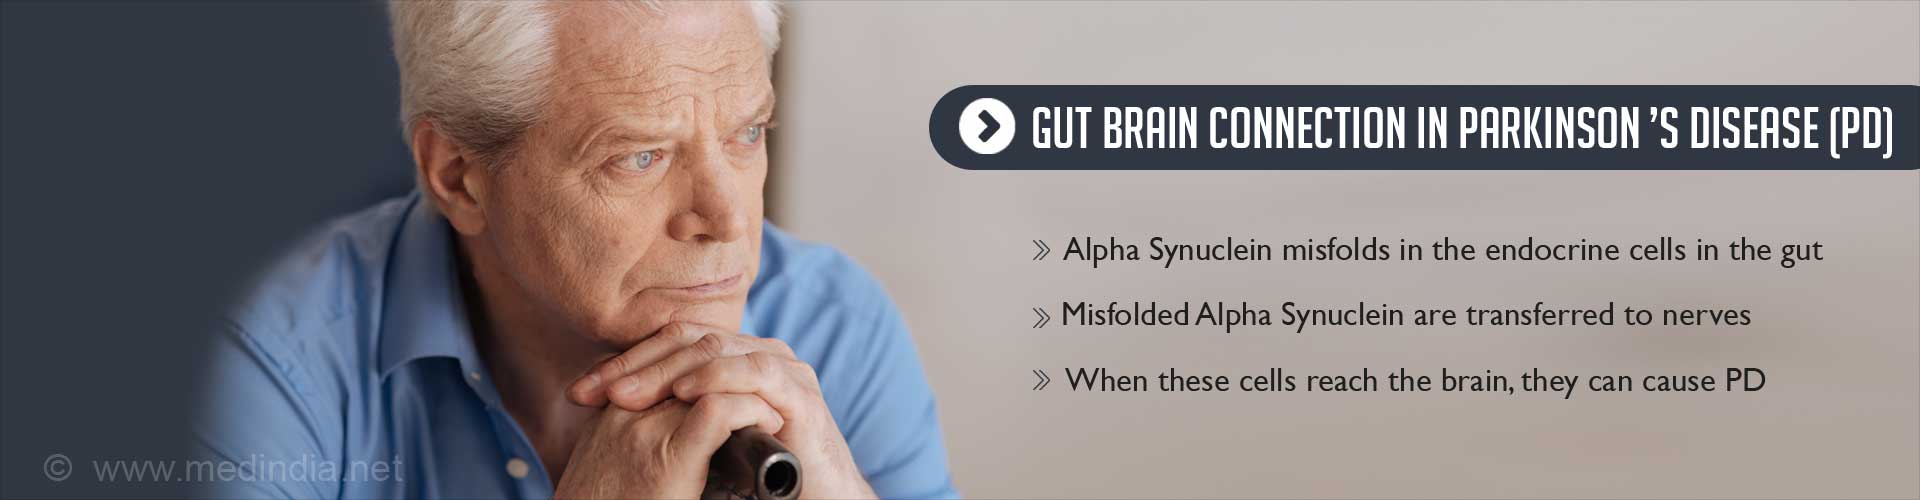 Gut brain connection in Parkinson's Disease (PD)
- Alpha Synuclein misfold in the endocrine cells in the gut
- Misfolded Alpha Synuclein are transferred to nerves
- When these cells reach the brain, they can cause PD